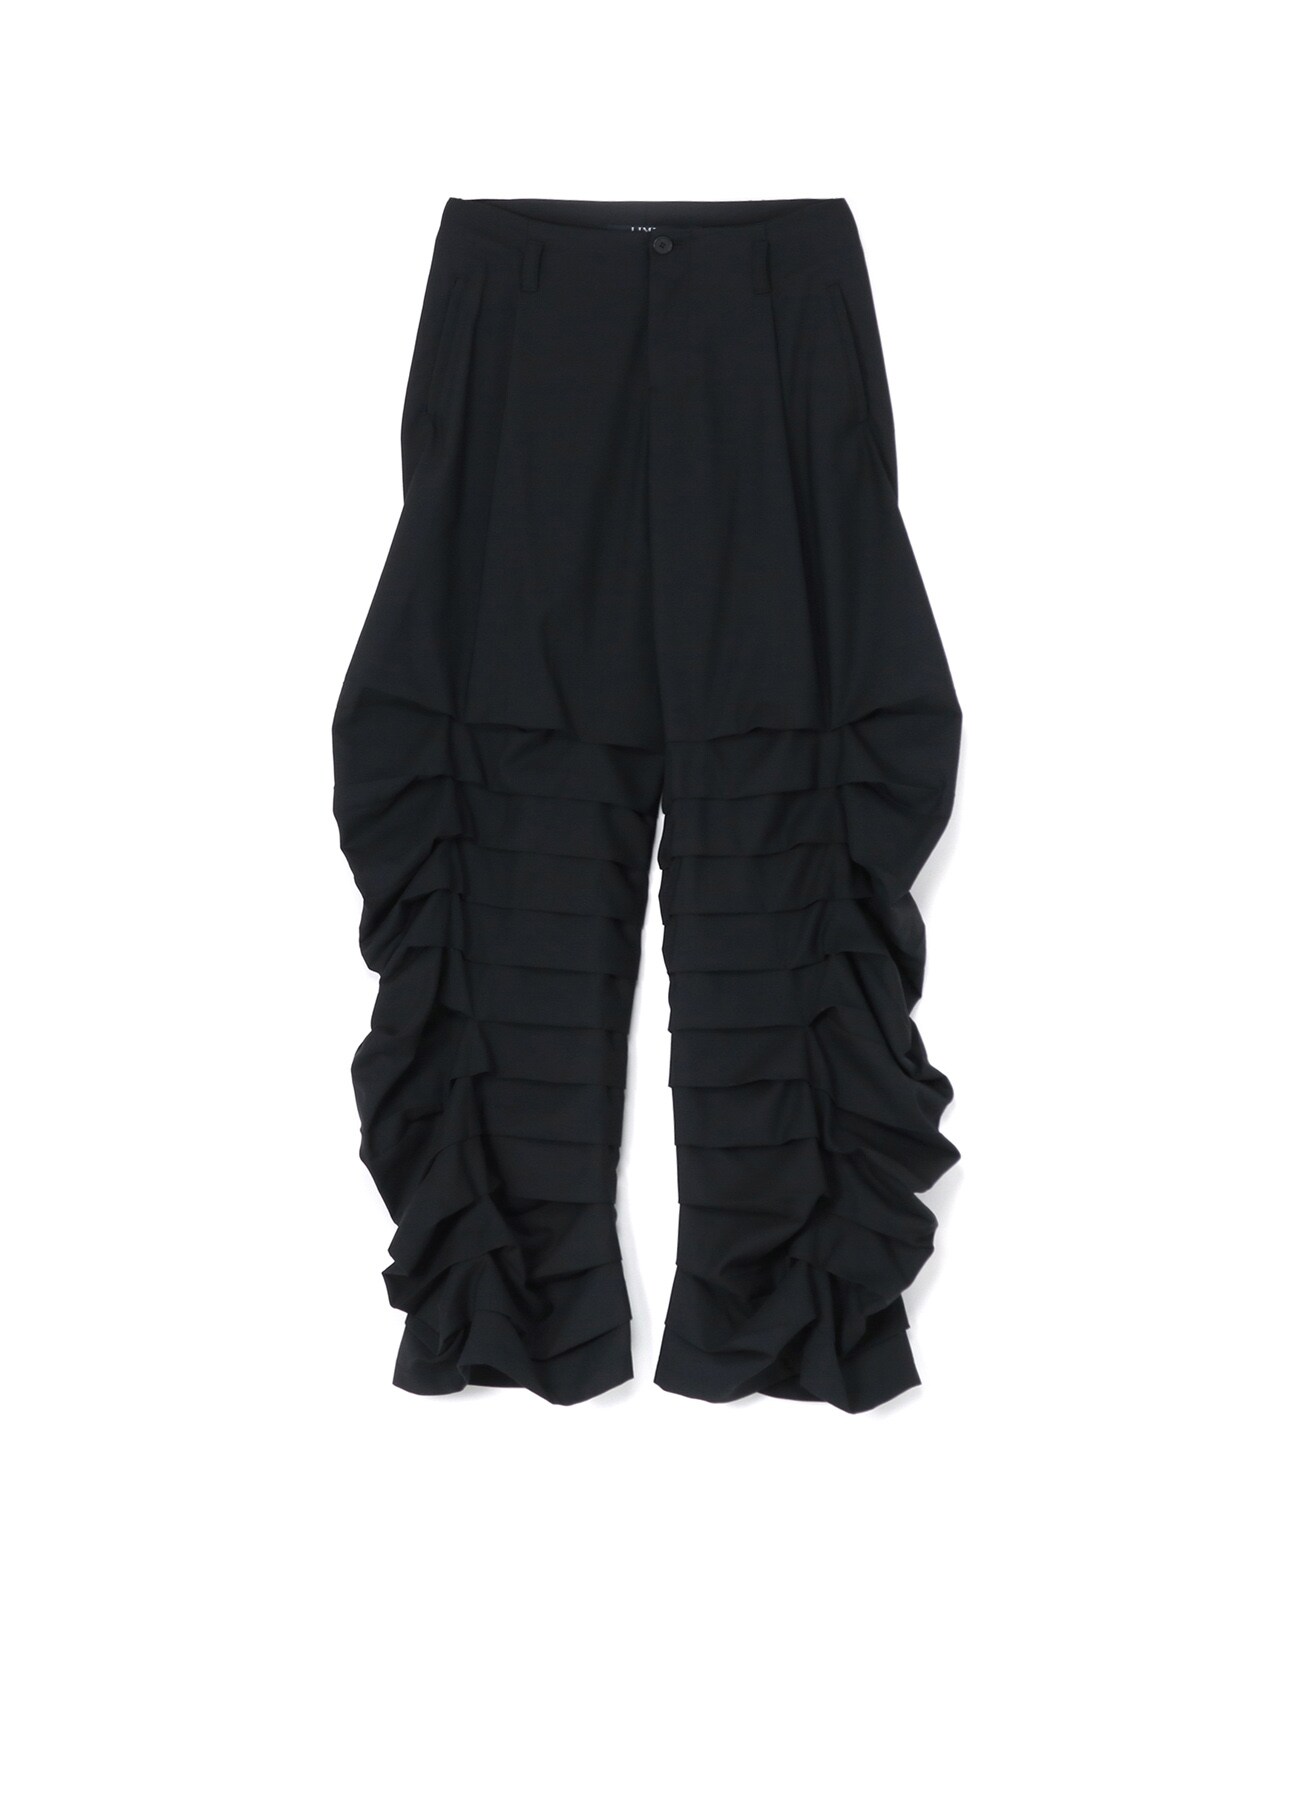 WOOL/POLYESTER SERGE PANTS WITH HORIZONTAL PLEATS